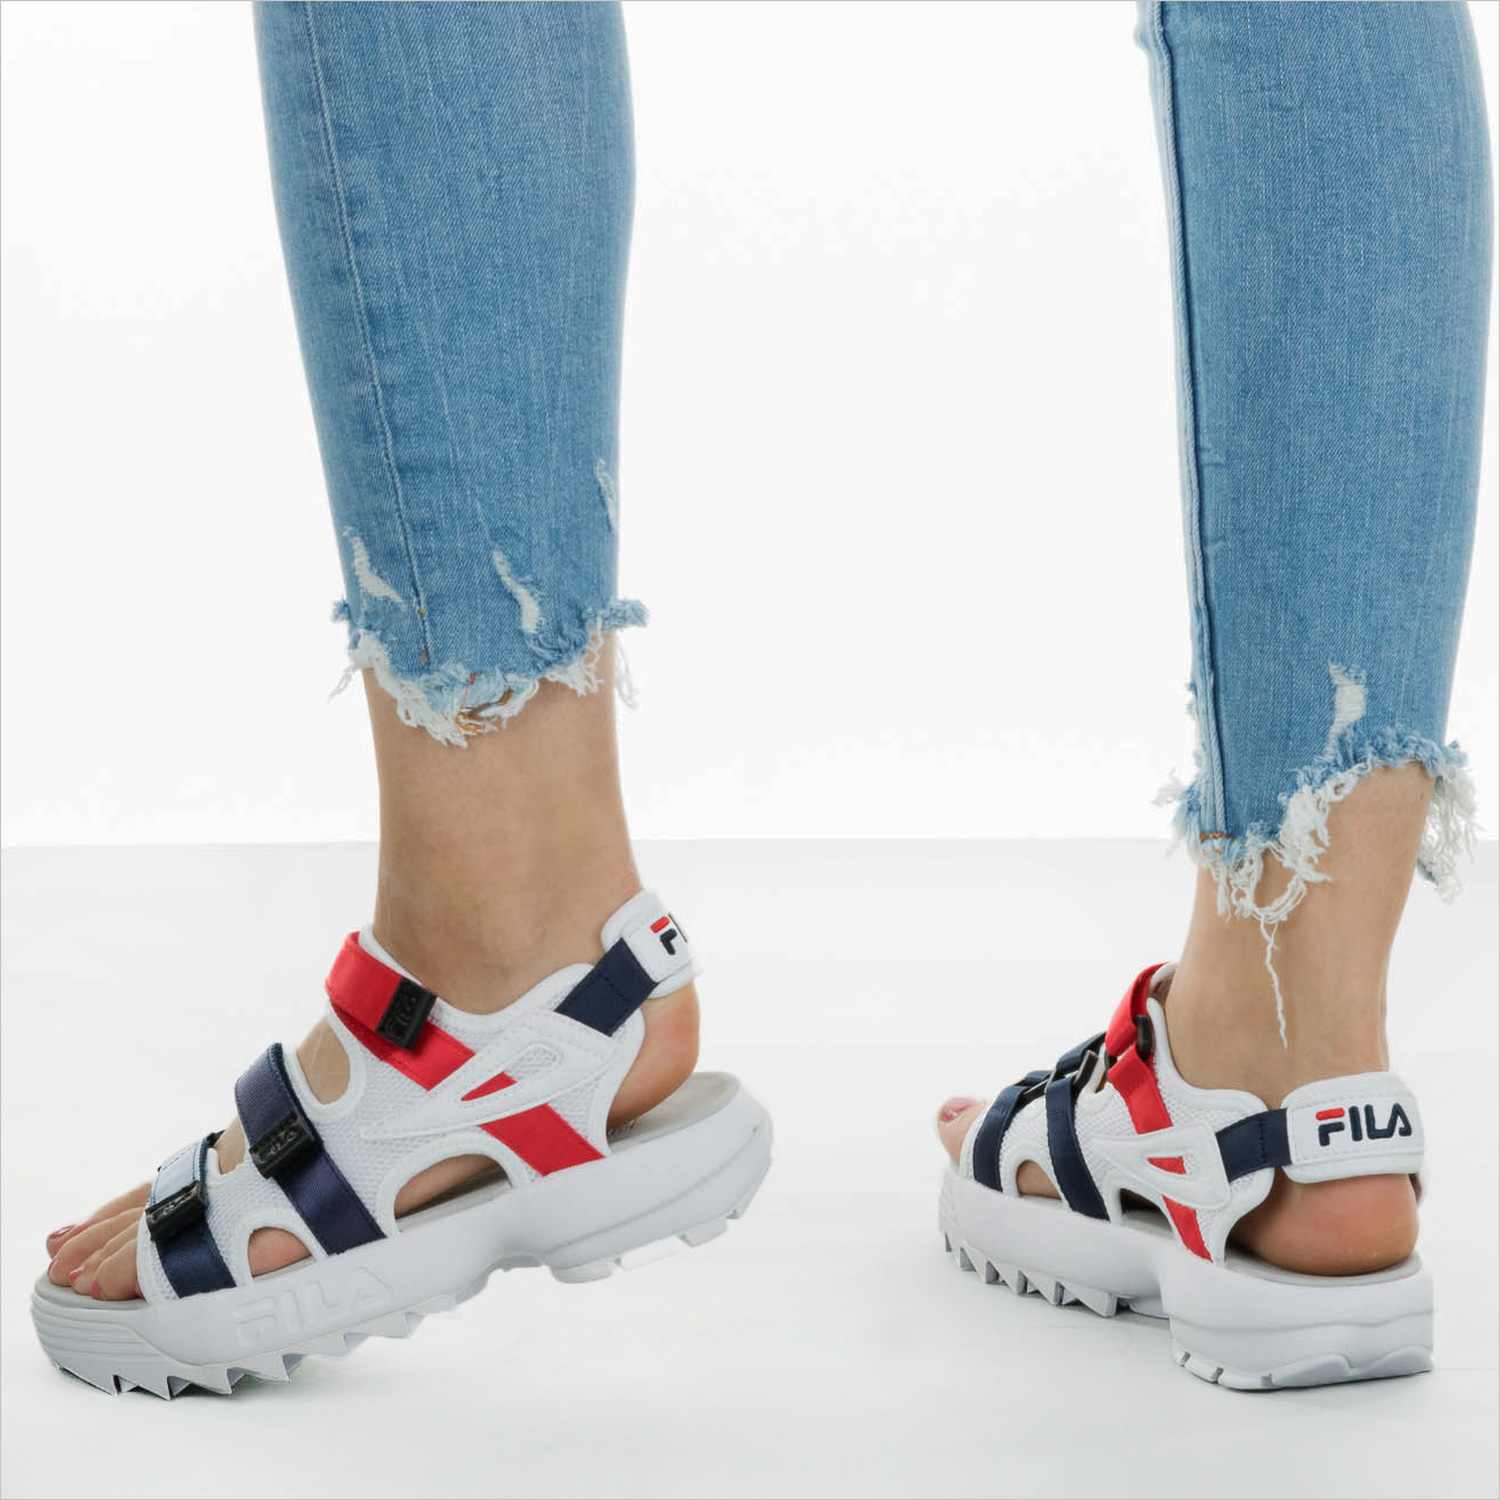 Fila Sandals,Slides Malaysia For Womens Sale